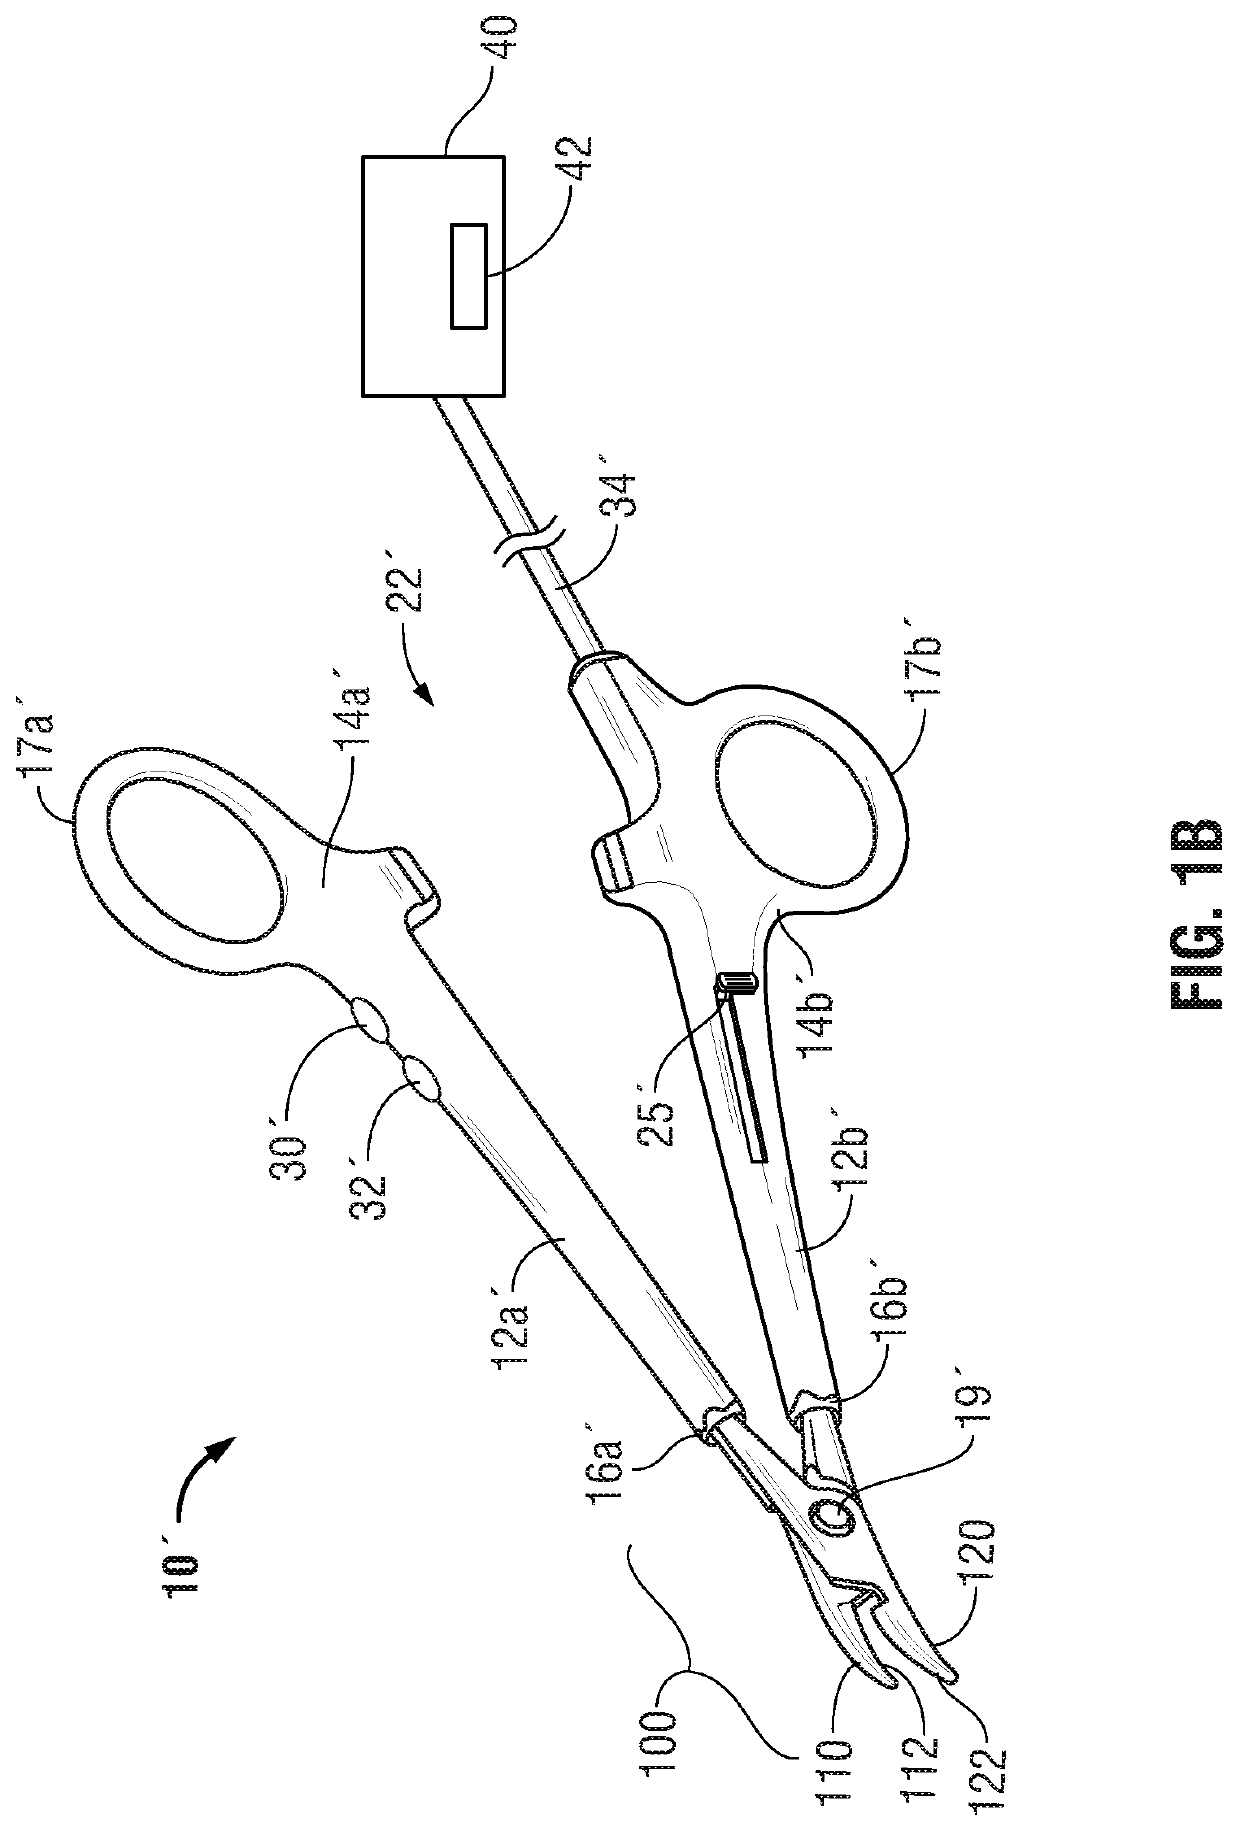 Surgical device with an end-effector assembly and system for monitoring of tissue during a surgical procedure